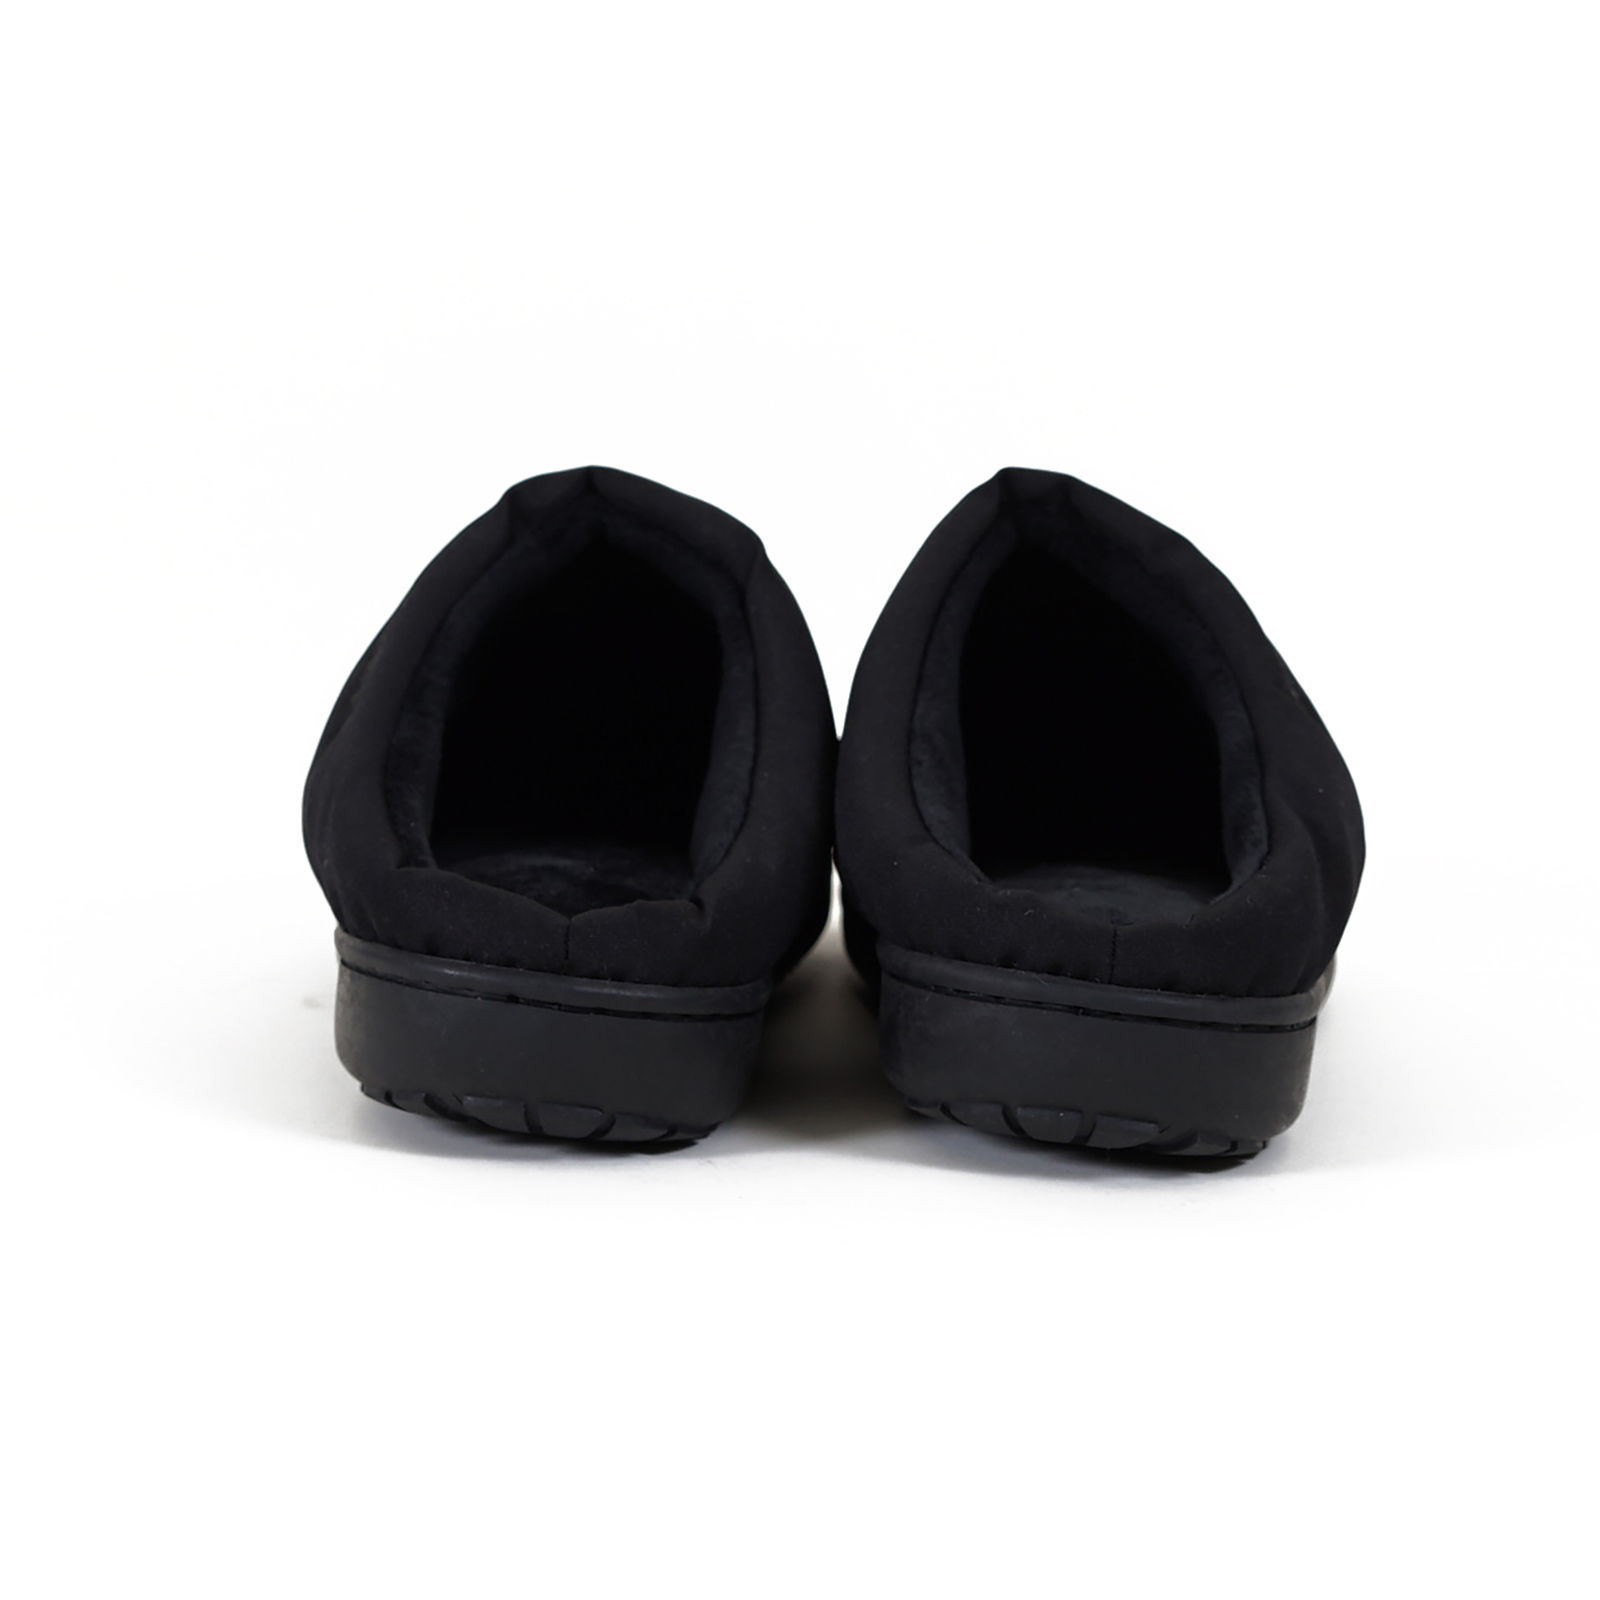 AMEICO - Official US Distributor of SUBU - Nannen Outdoor Slippers - Black